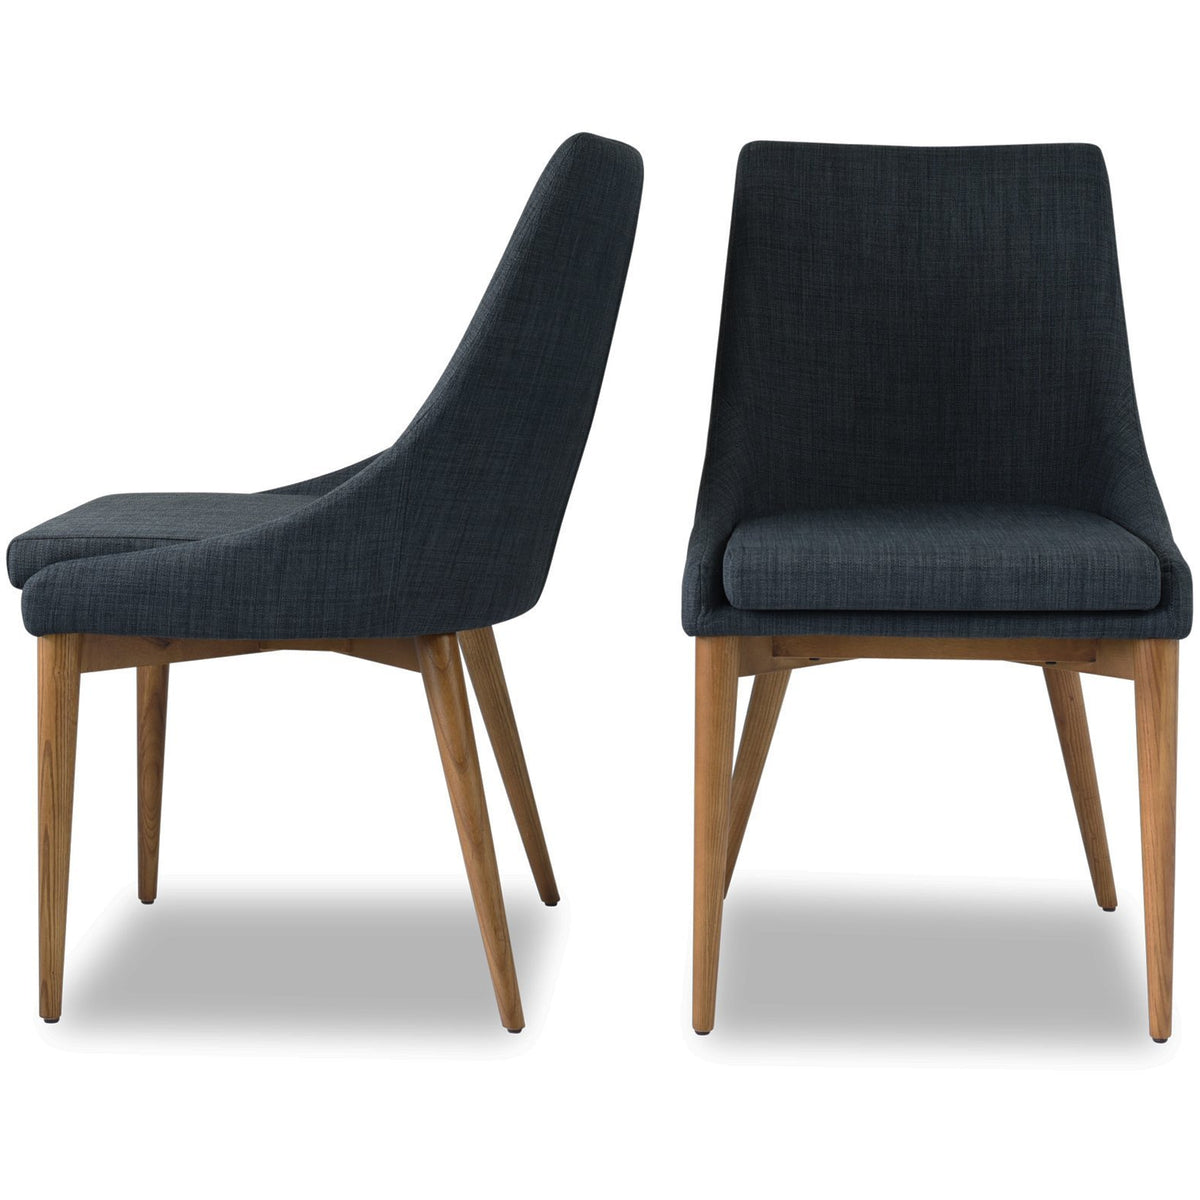 Edloe Finch Jessica Contemporary Dining Chair in Dark Grey, Set of 2